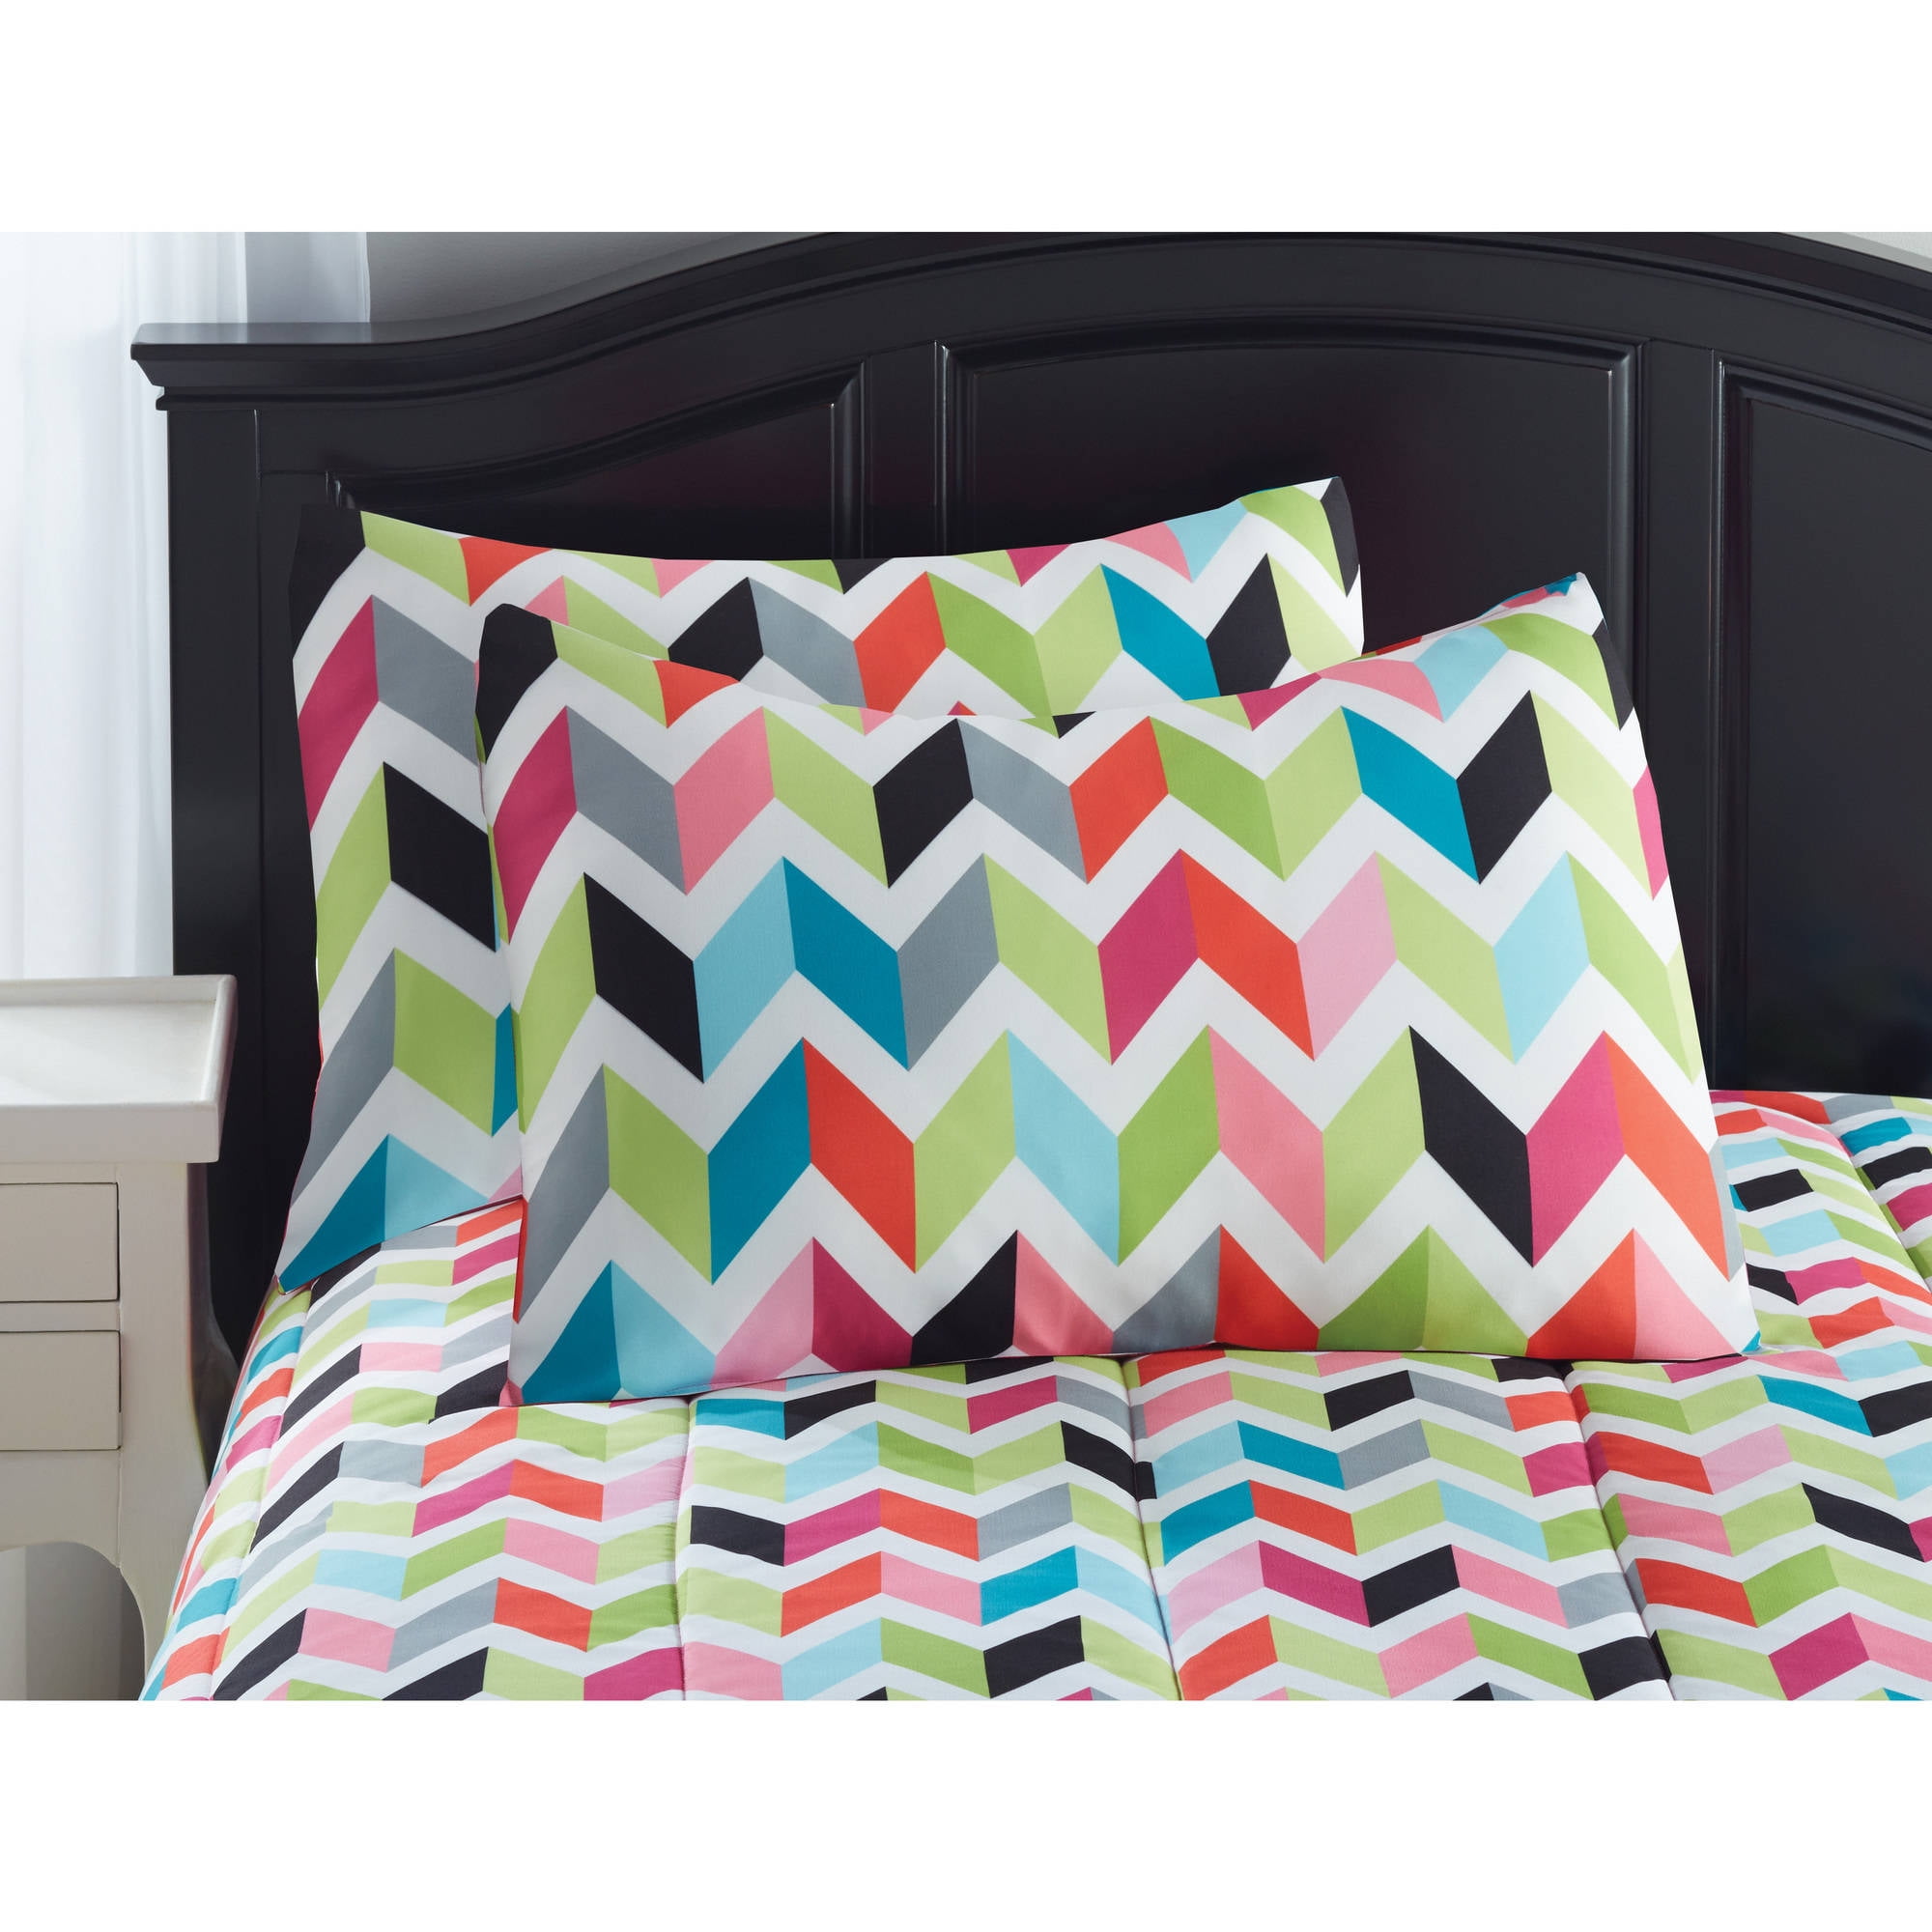 Your Zone Bright Chevron Print Bed in a Bag Bedding Set 1 Each queen. 